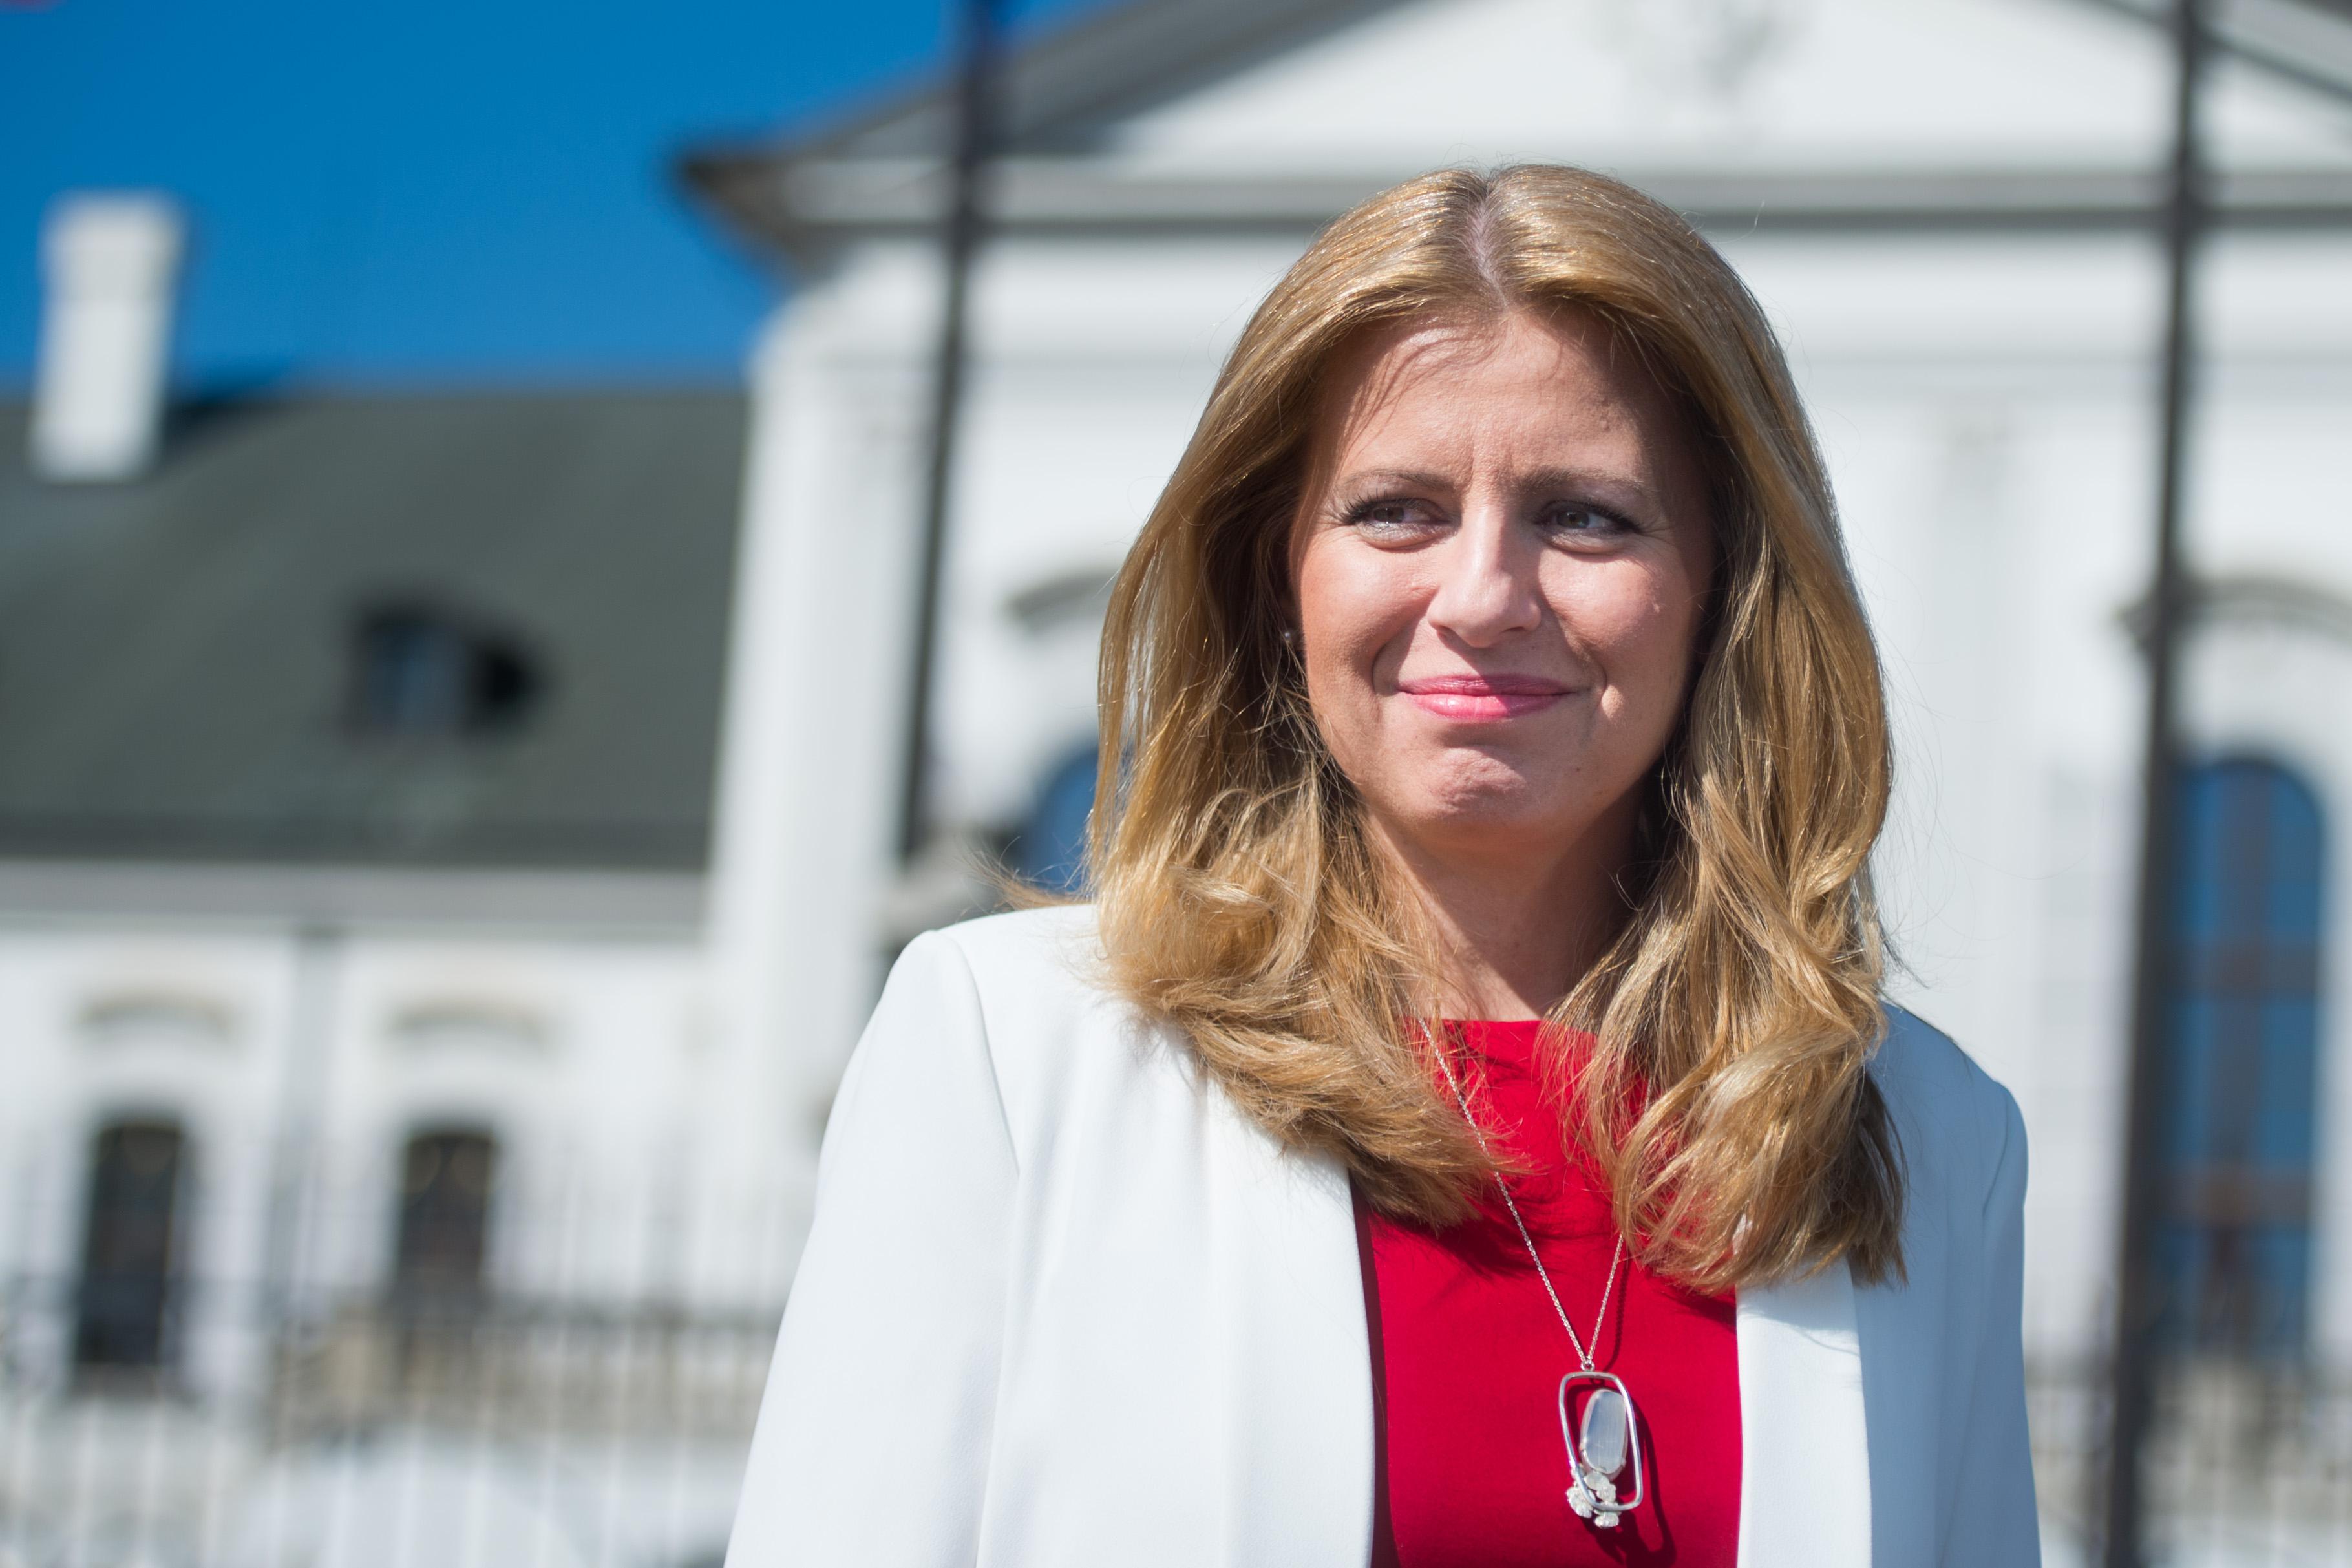 Newly elected Slovakia's President elect Zuzana Caputova speaks to a journalist in the front of the Presidential palace in Bratislava, Slovakia on March 31, 2019.